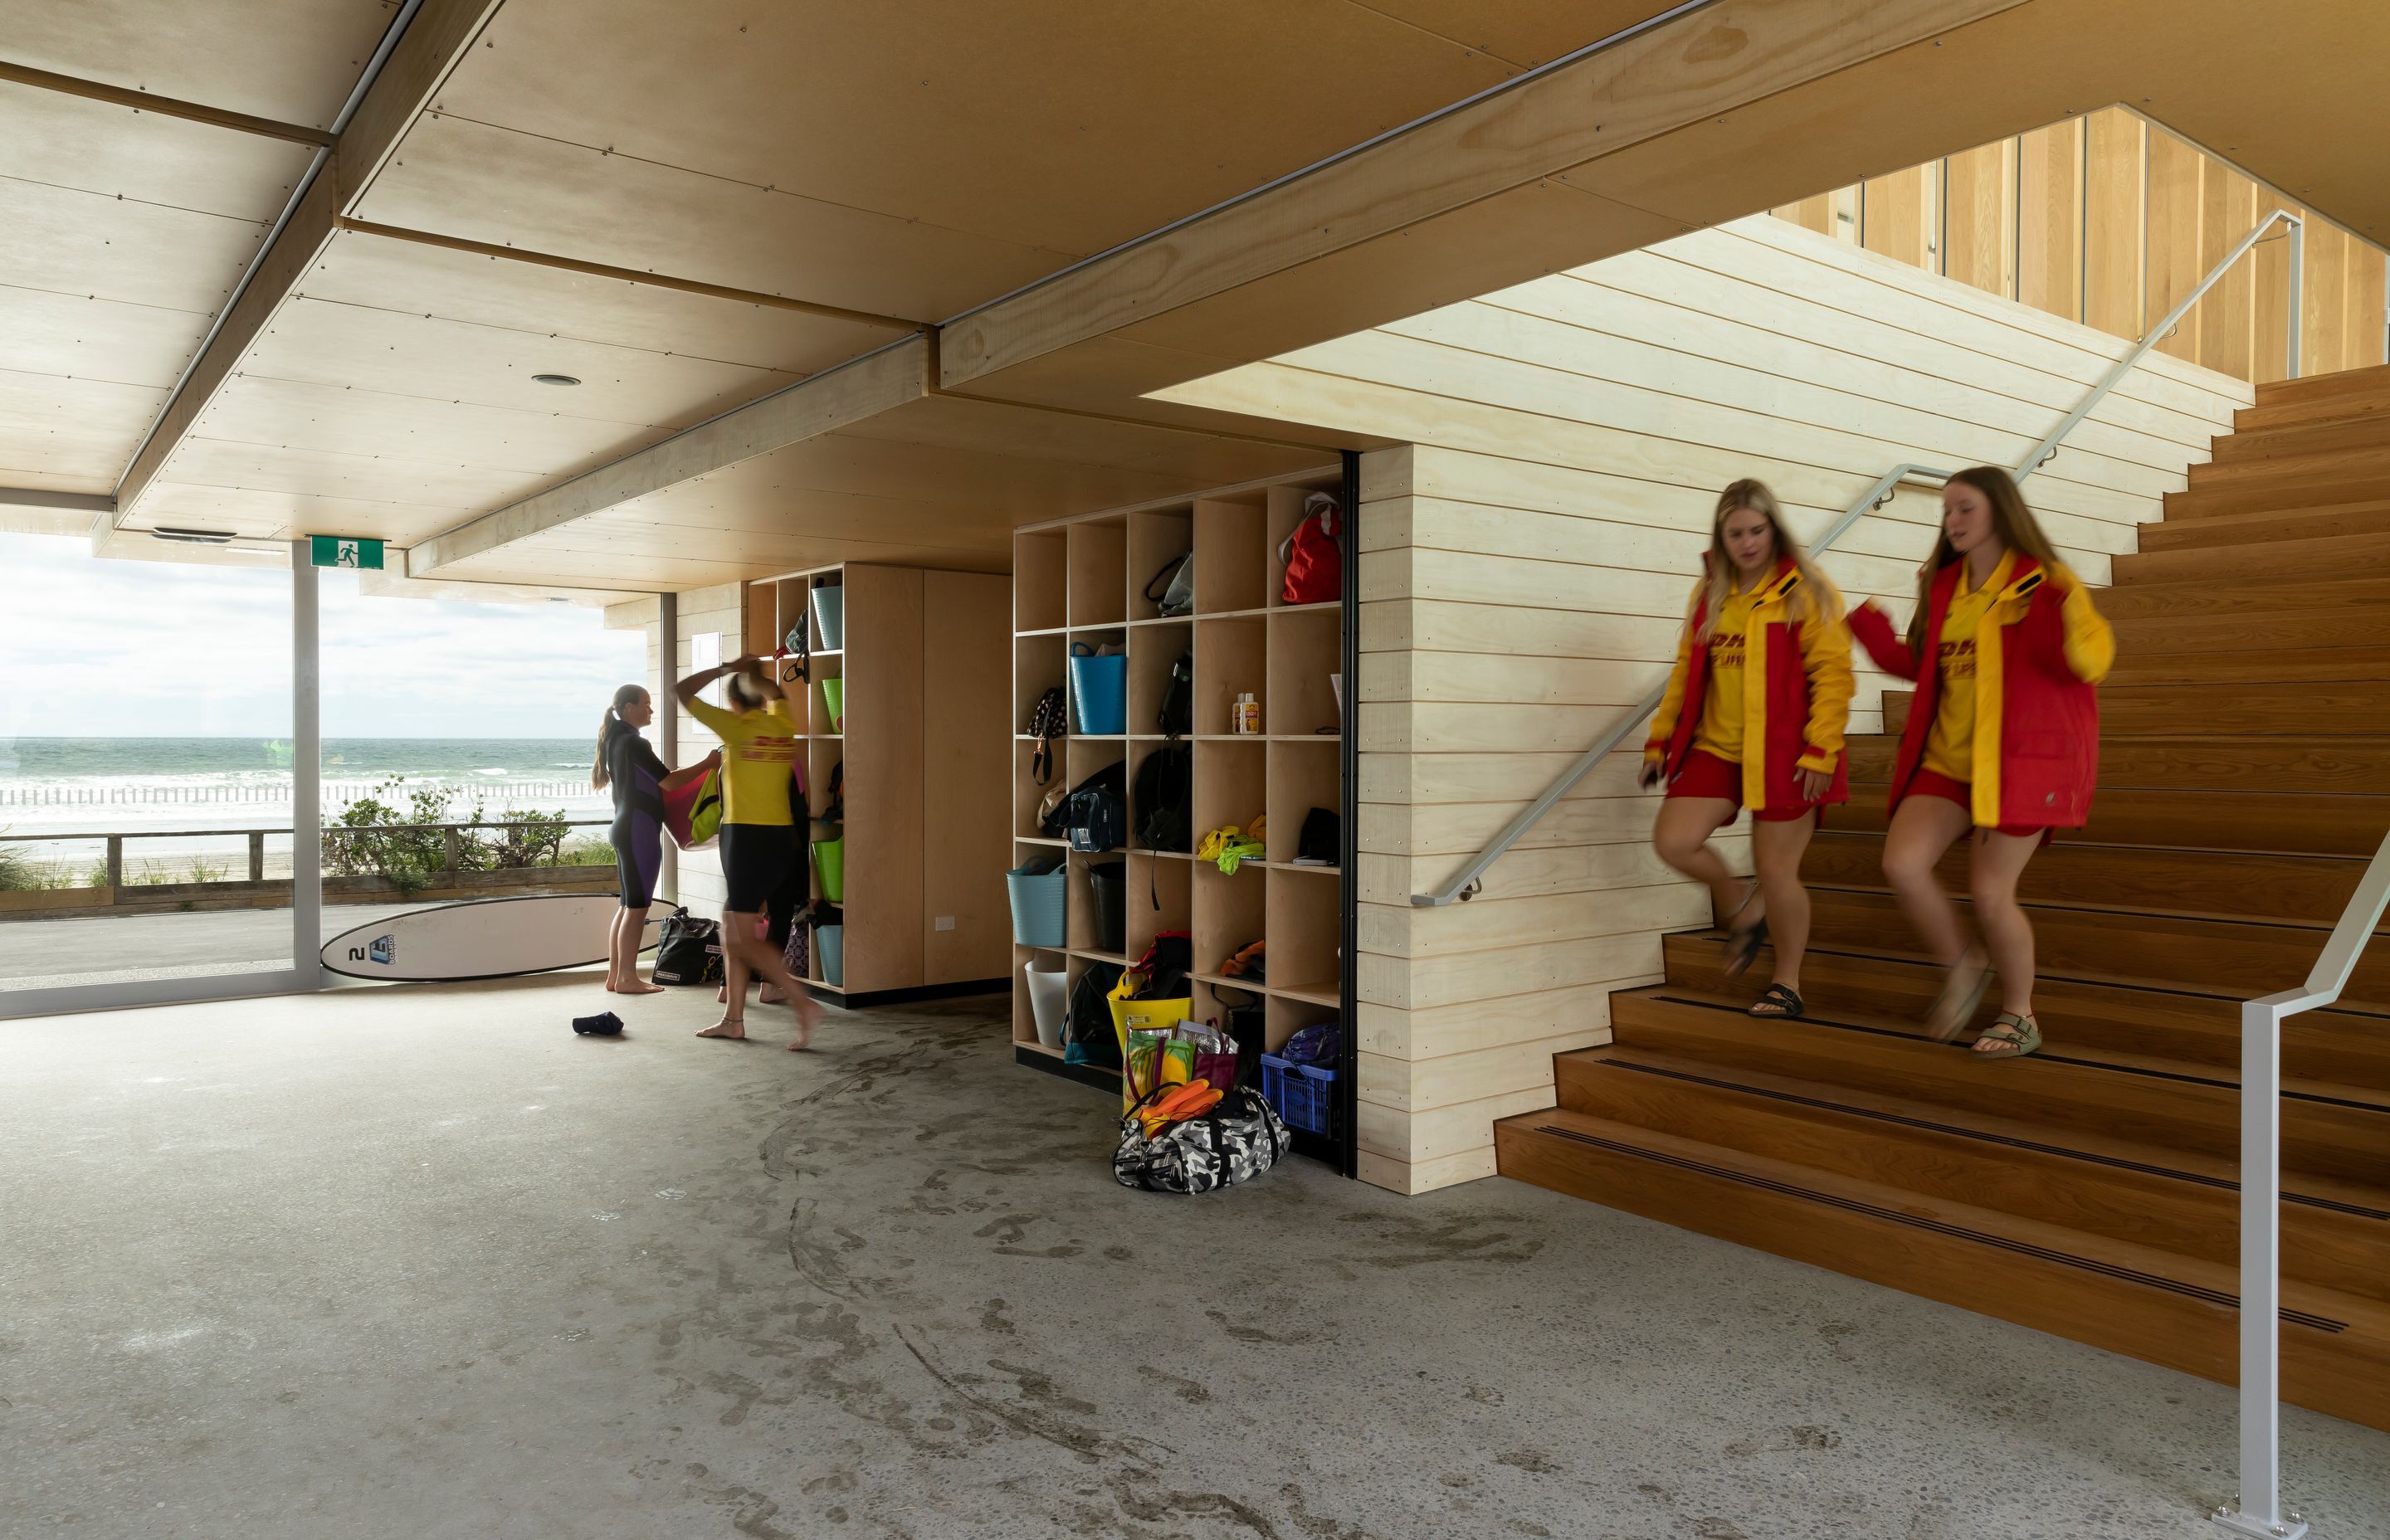 The large glass doors on the seafront provide an entry to the building; the wide foyer and stairs offer a place for groups of lifeguards and trainees to debrief or gather out of the wind and elements.